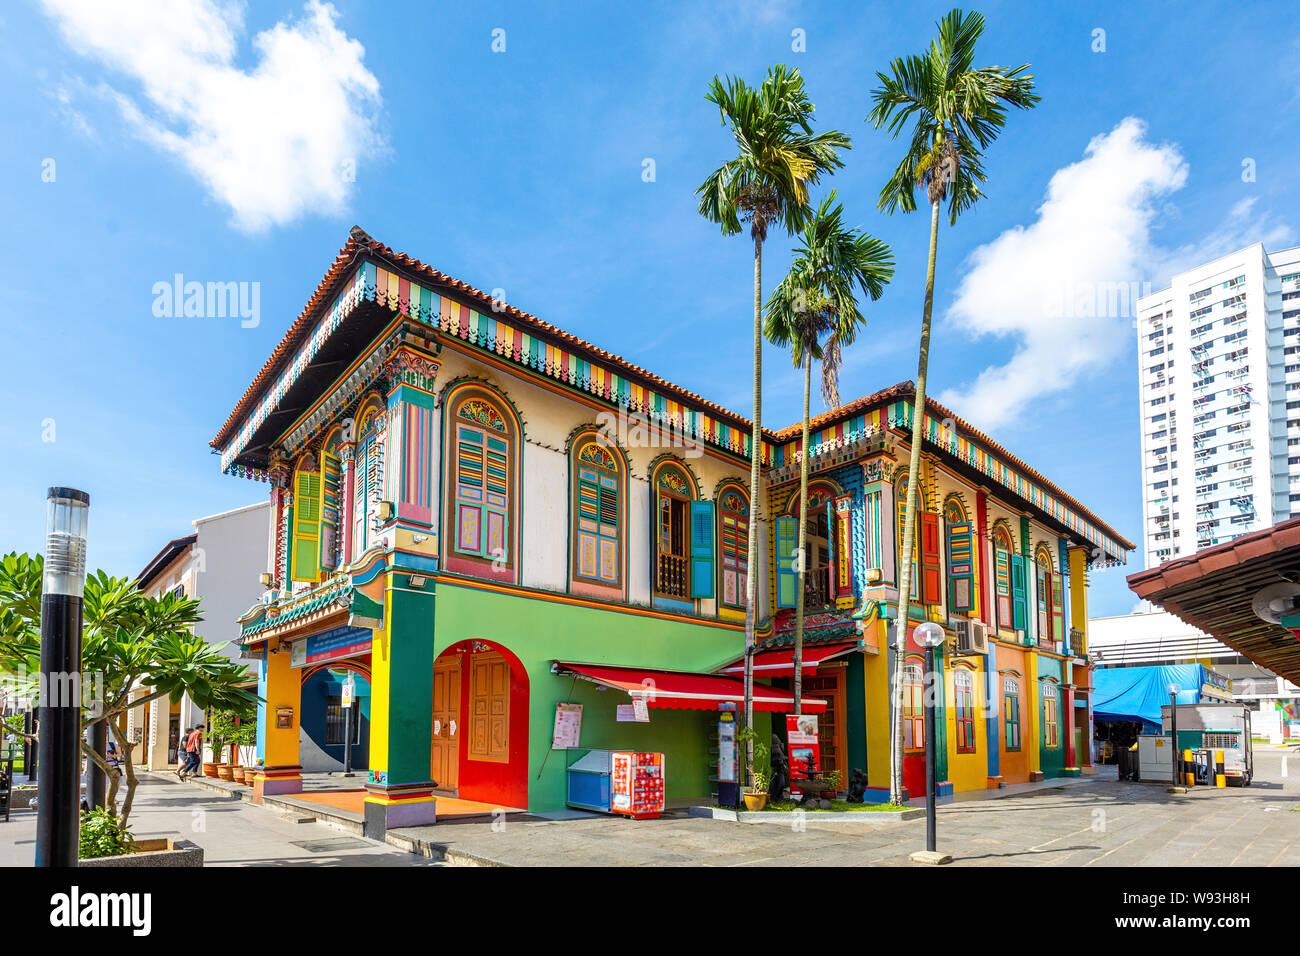 Colorful facade of building in Little India, Singapore. Stock Photo